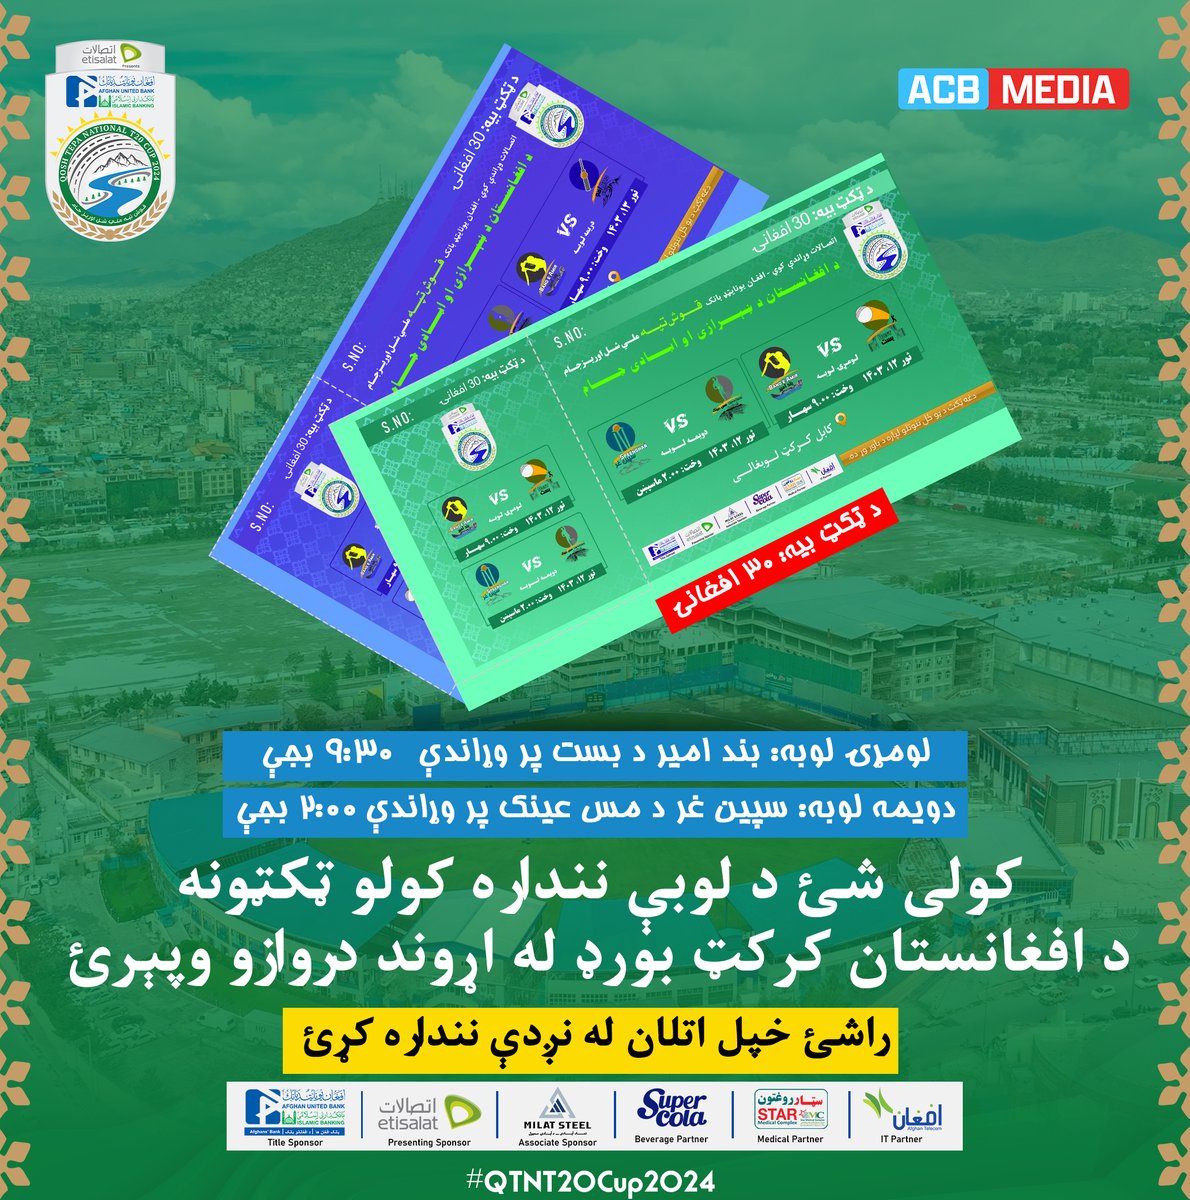 Tickets are Live Now! 🎟️

Book your tickets from two entrances at the Kabul National Stadium to witness the exciting games of the Etisalat Presents, Afghan United Bank - Qosh Tepa National T20 Cup 2024.

#QNTN20Cup2024